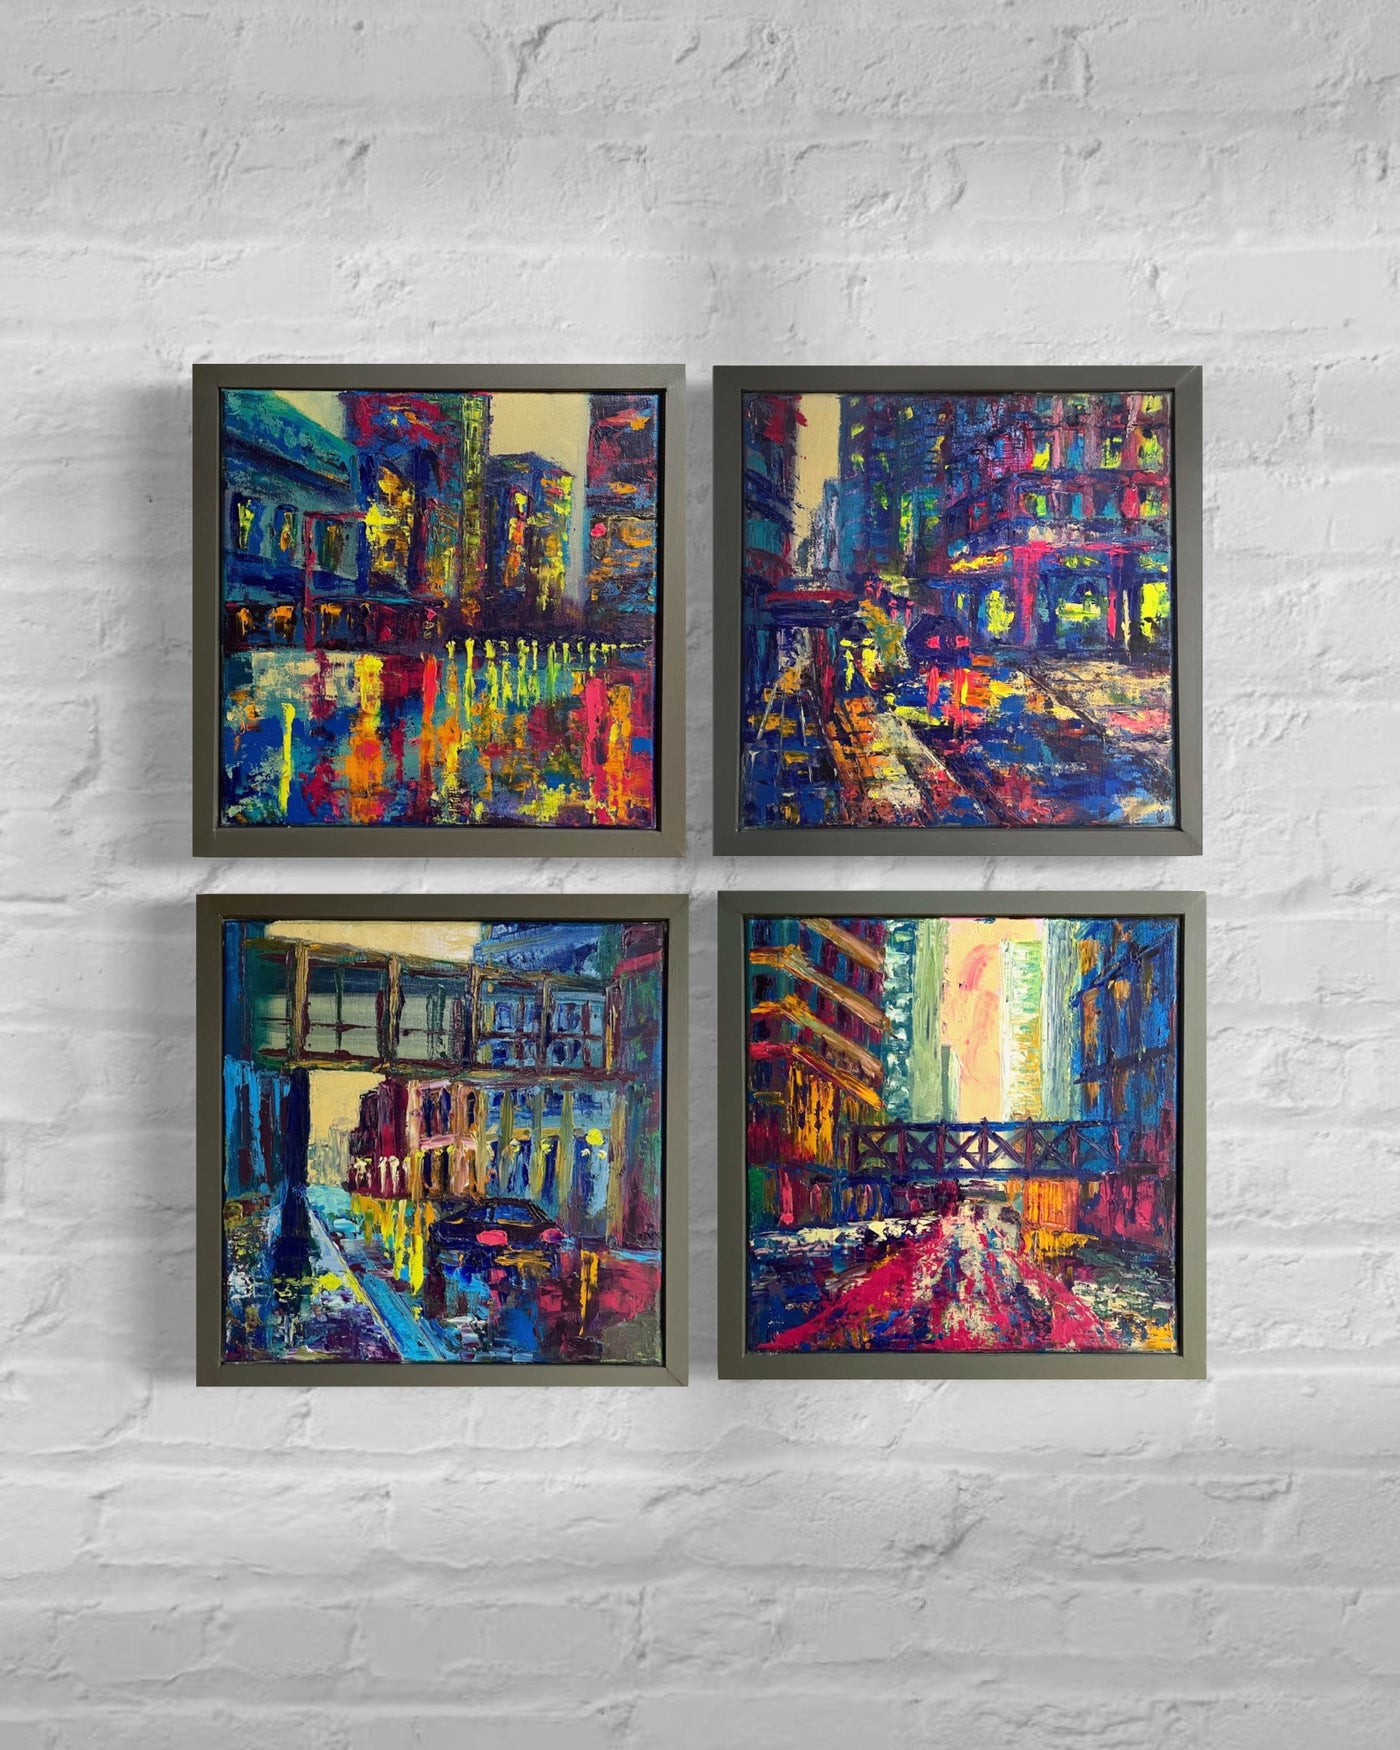 Wet Streets & Dancing Lights - 28”W x 28”H Quadiptych